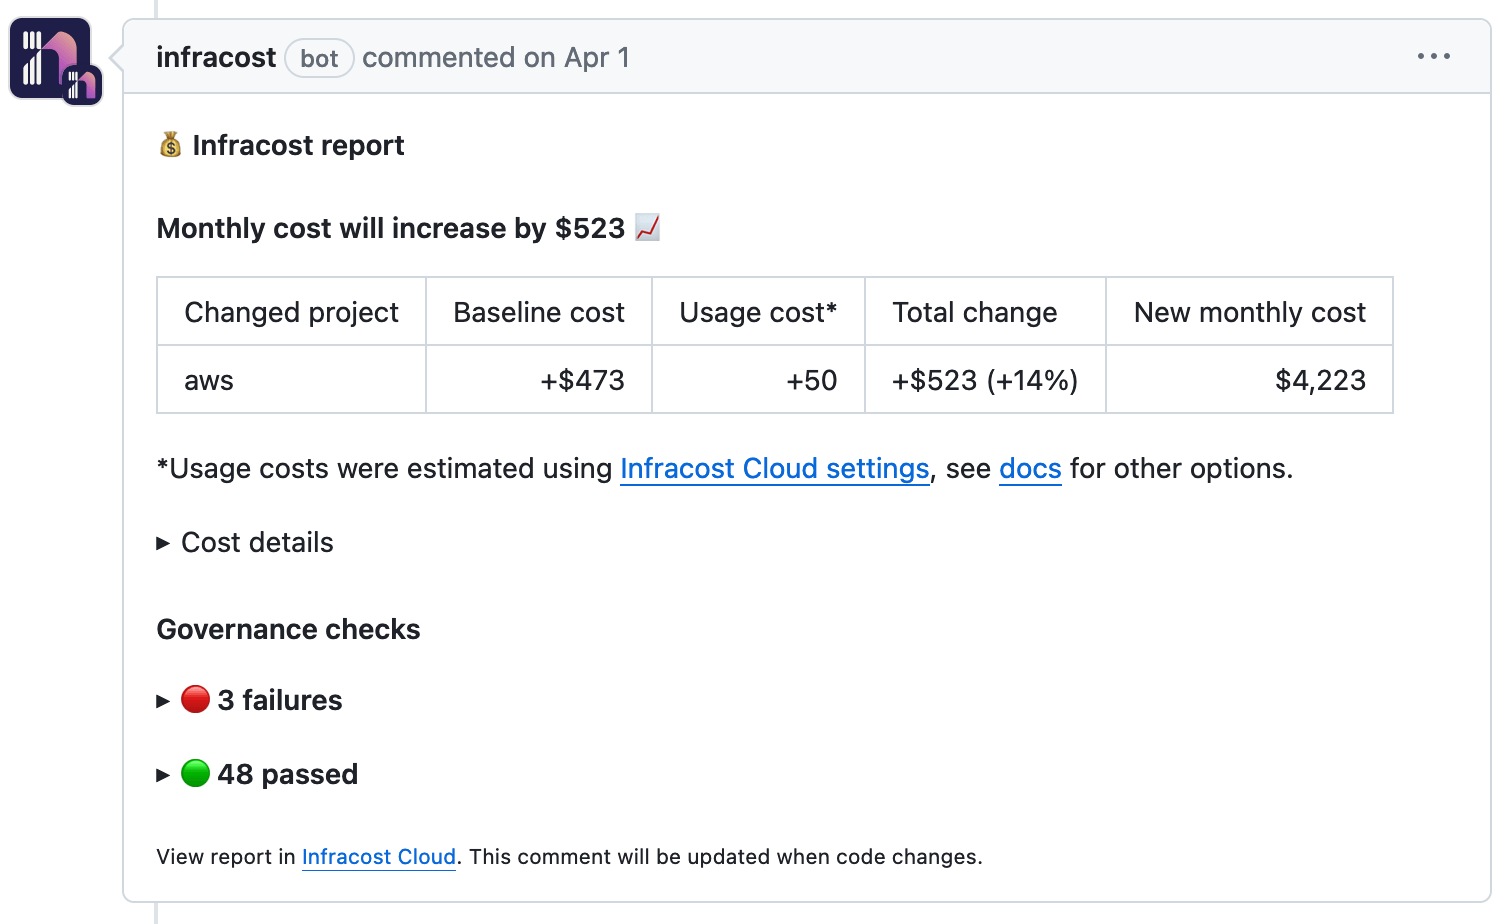 Create a pull request to test FinOps policies.